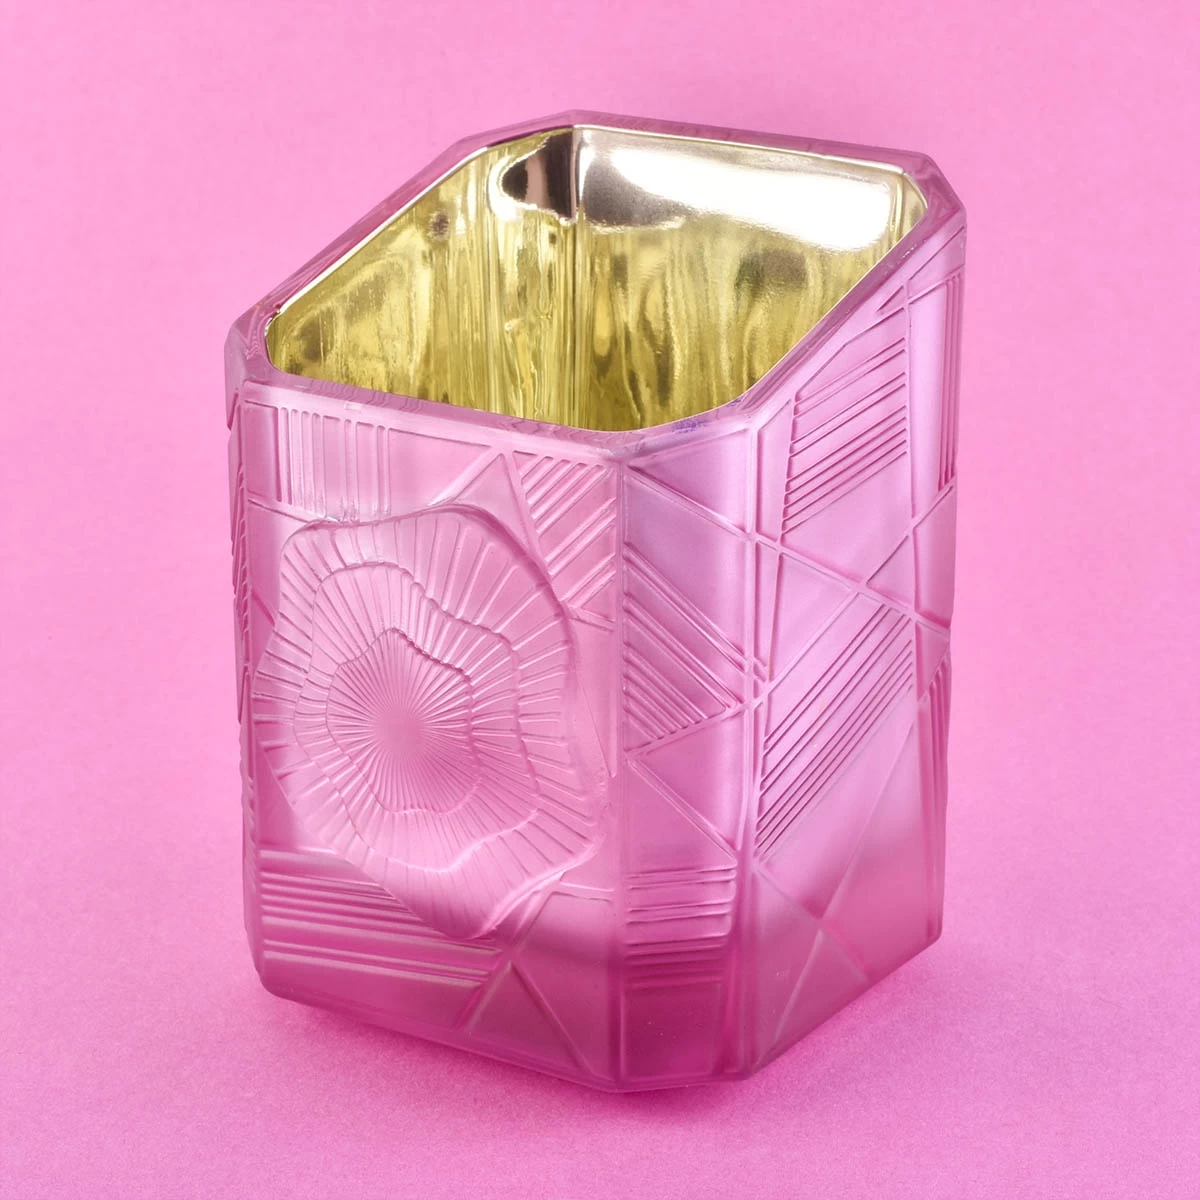 Sunny design custom pink luxury square Glass candle holder